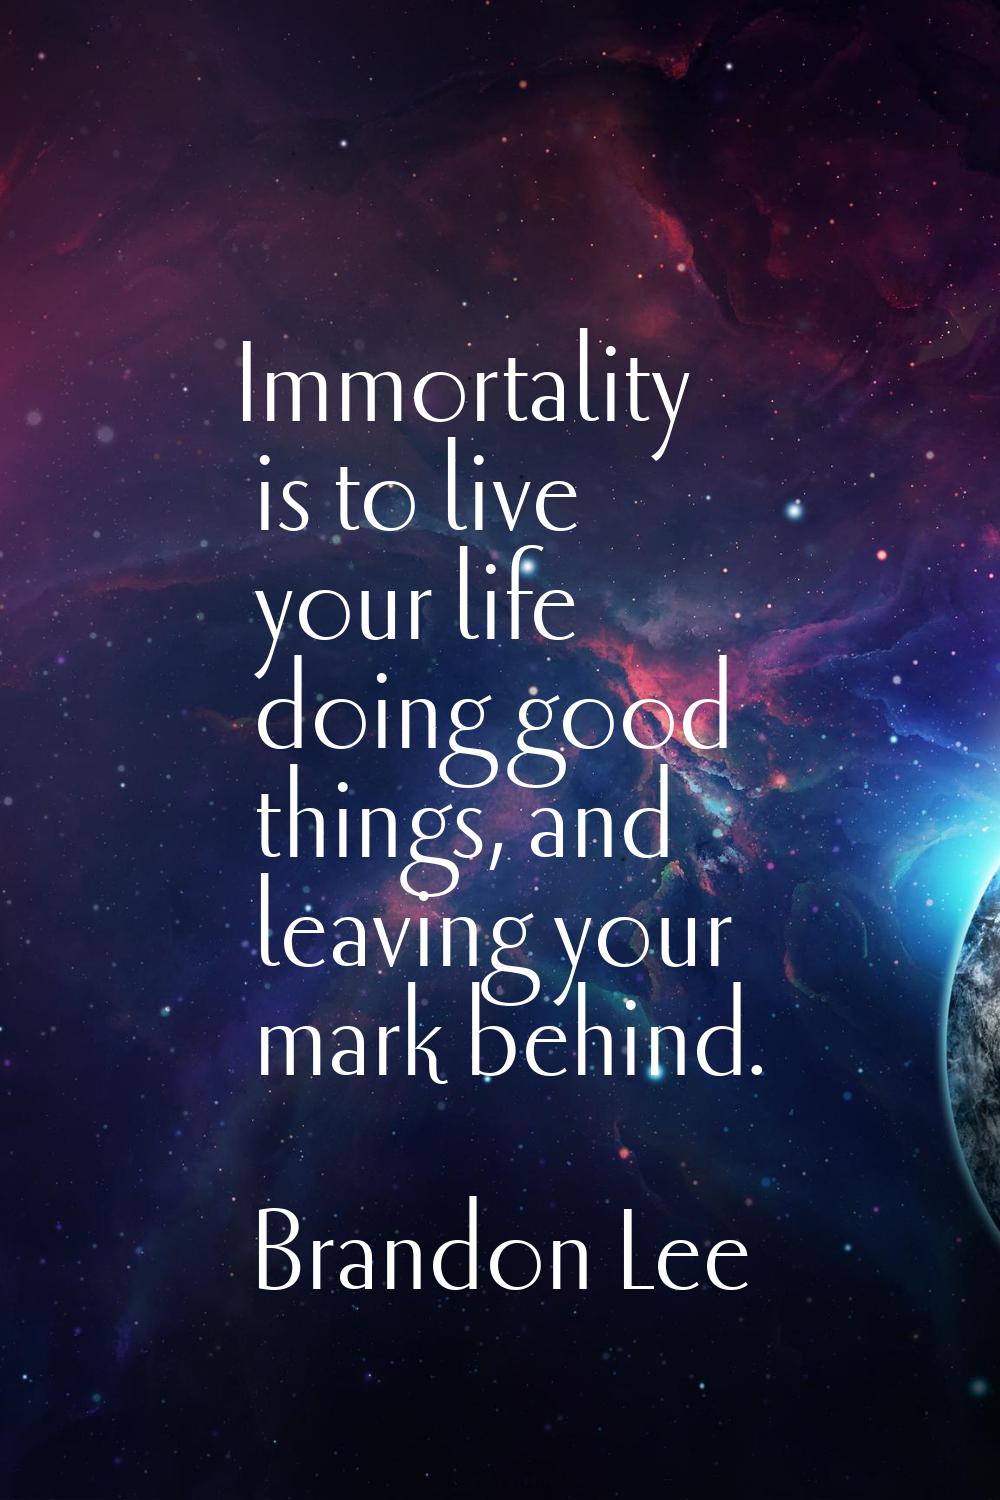 Immortality is to live your life doing good things, and leaving your mark behind.